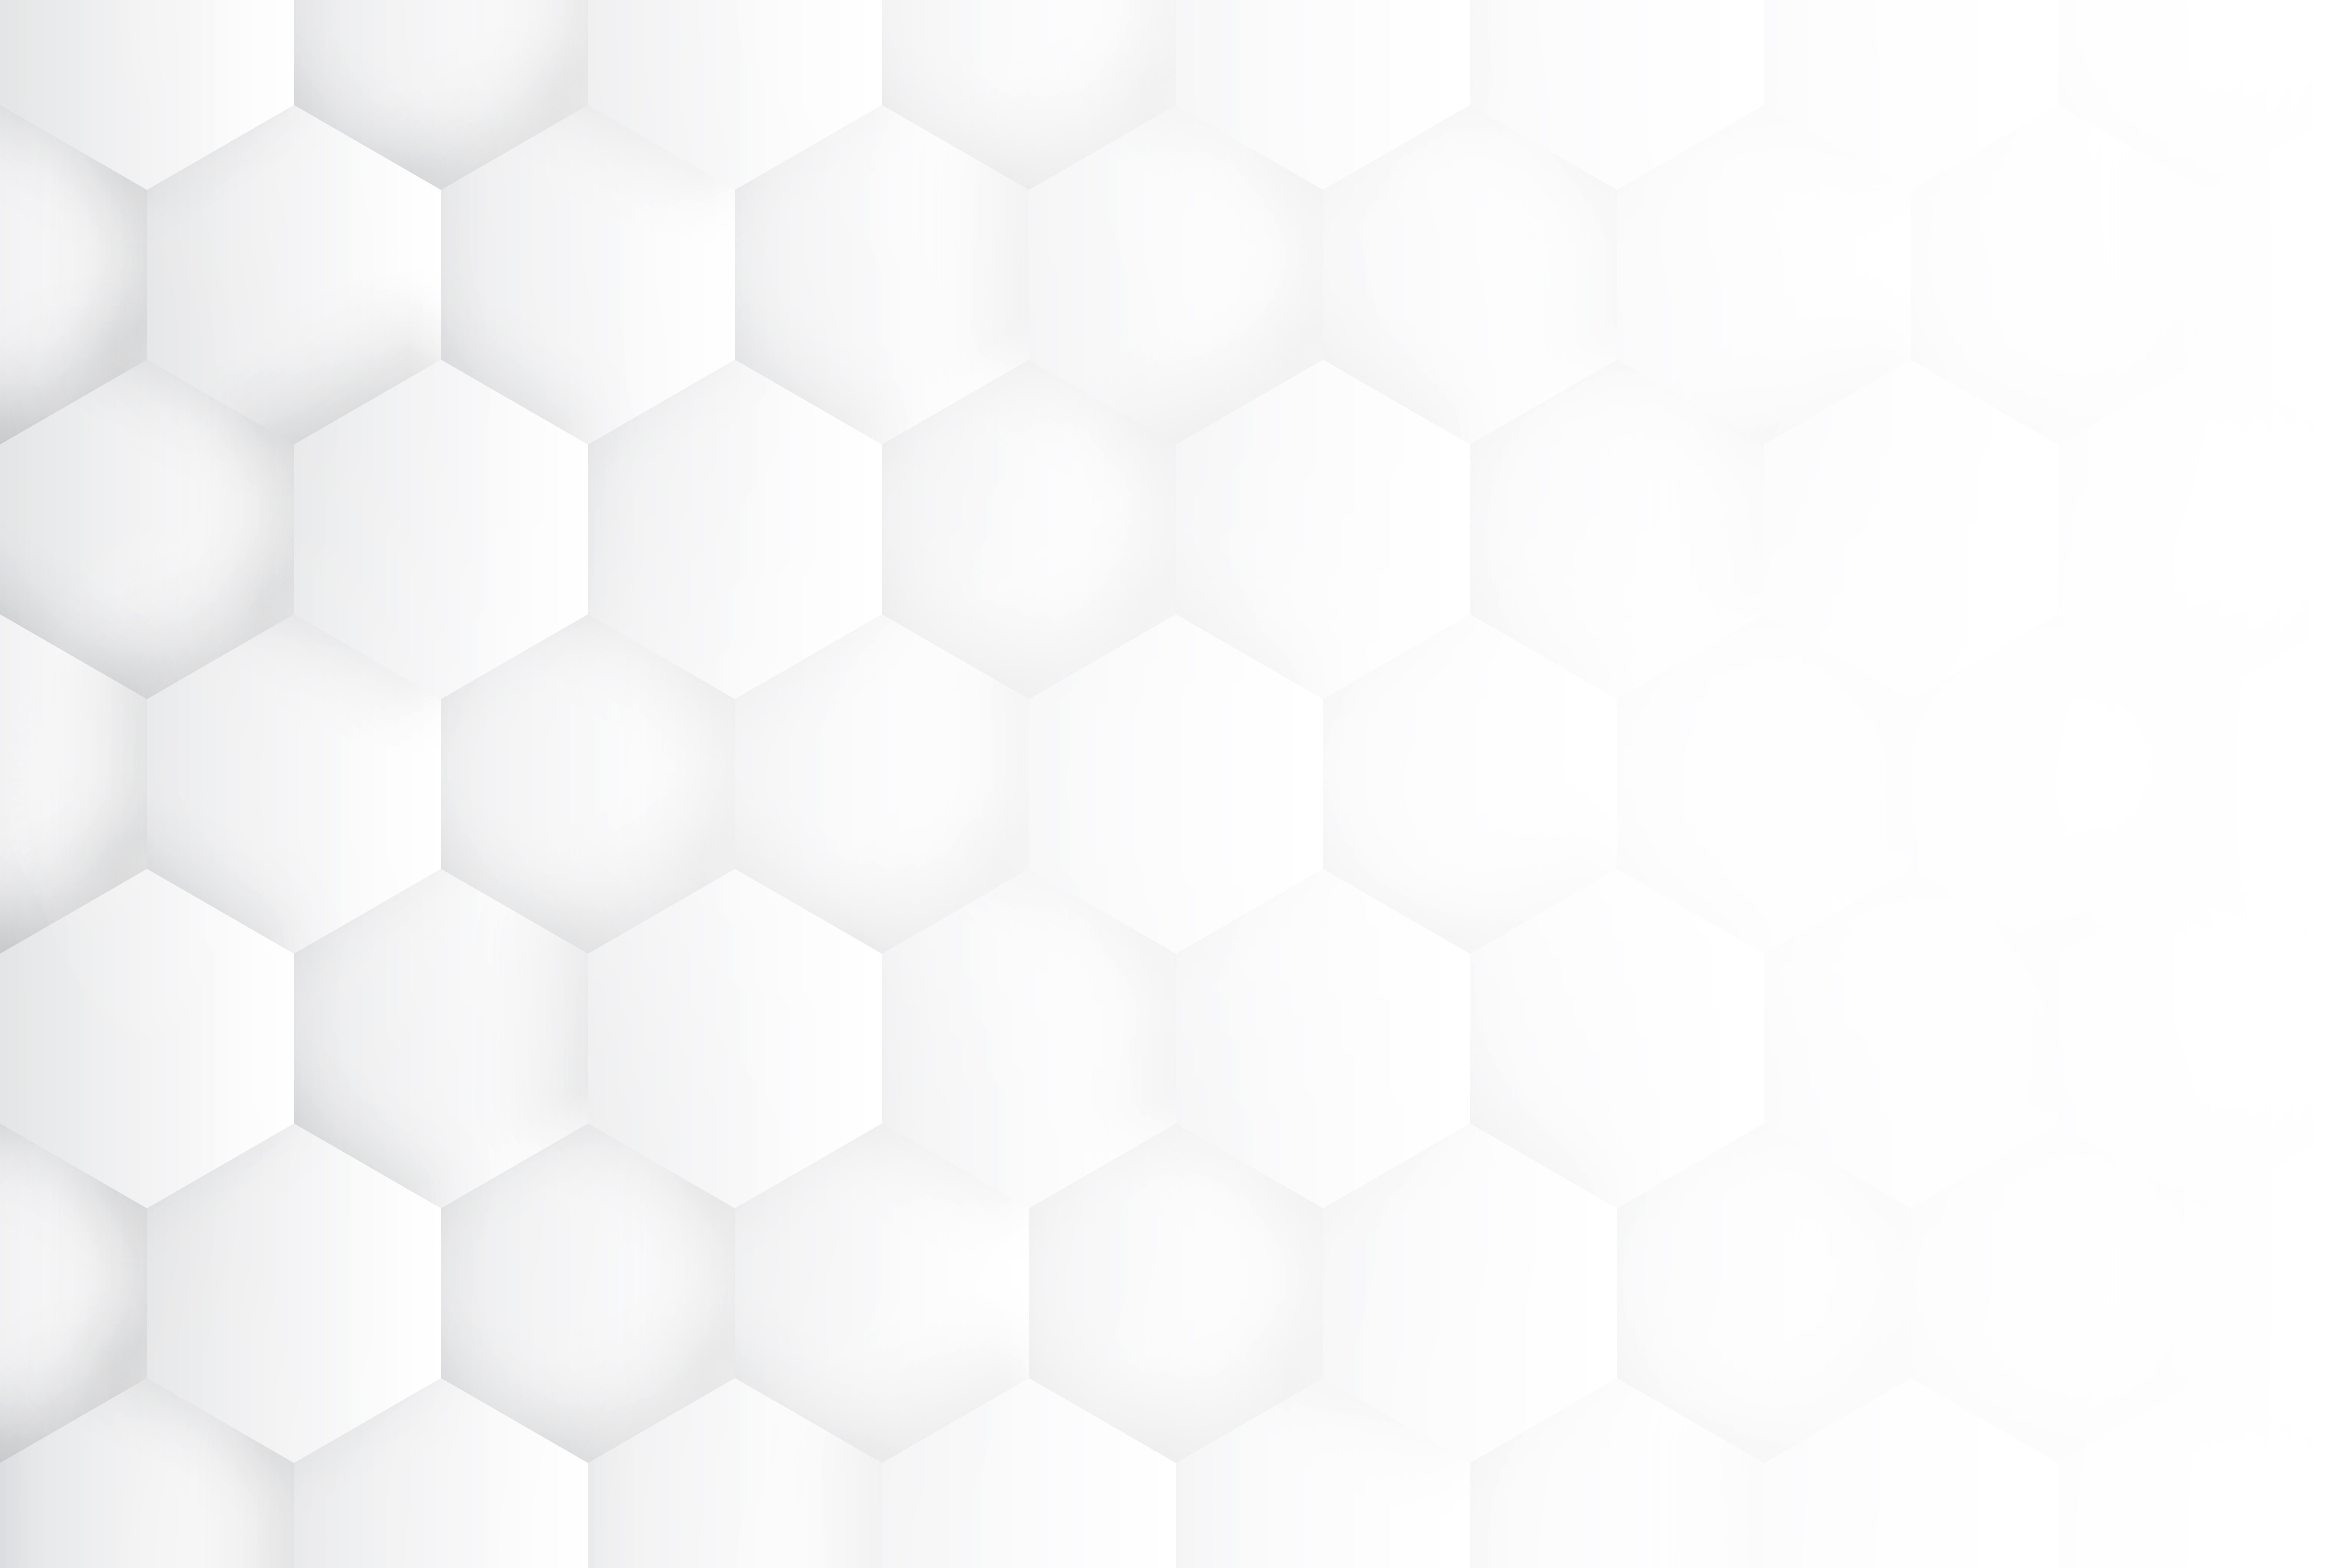 3D Hexagons High Technology White Abstract Background